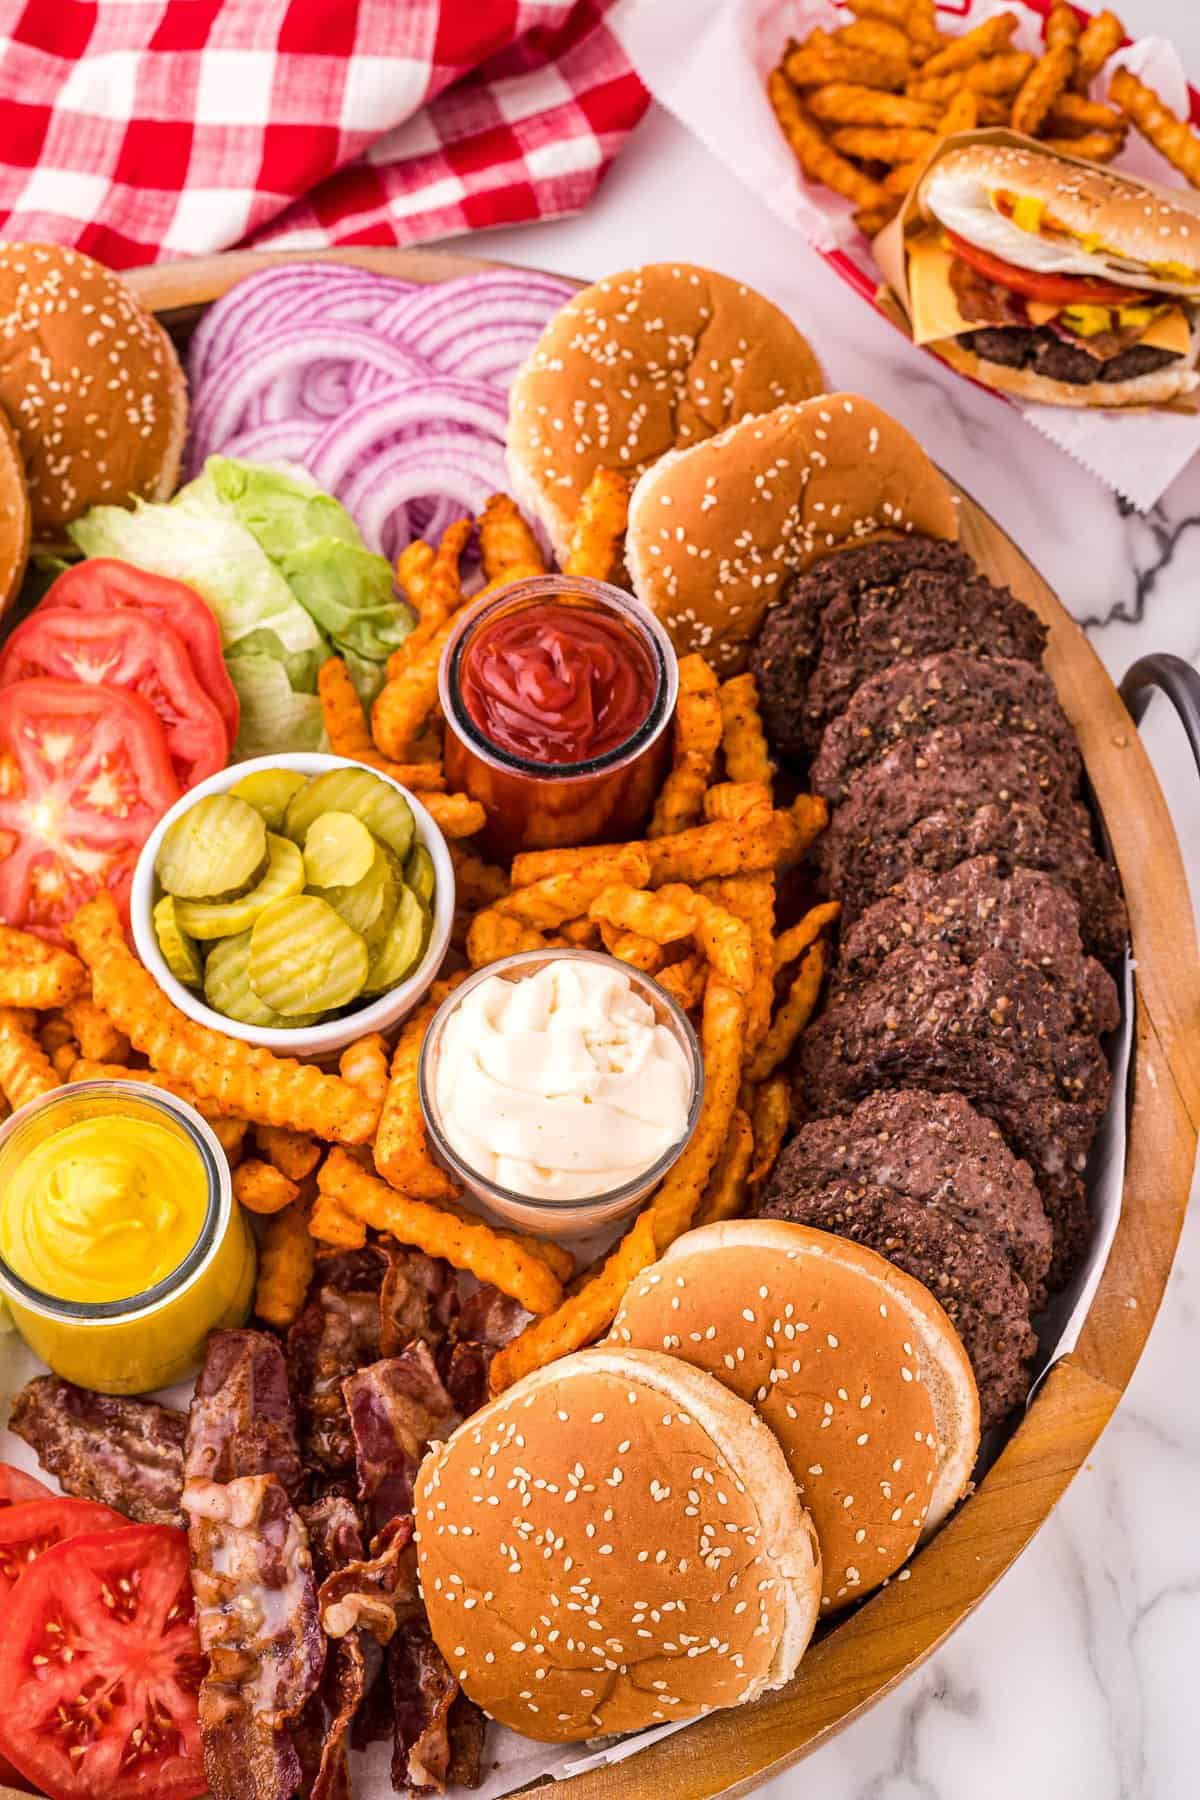 Overhead image of burger board with condiments, burgers and toppings